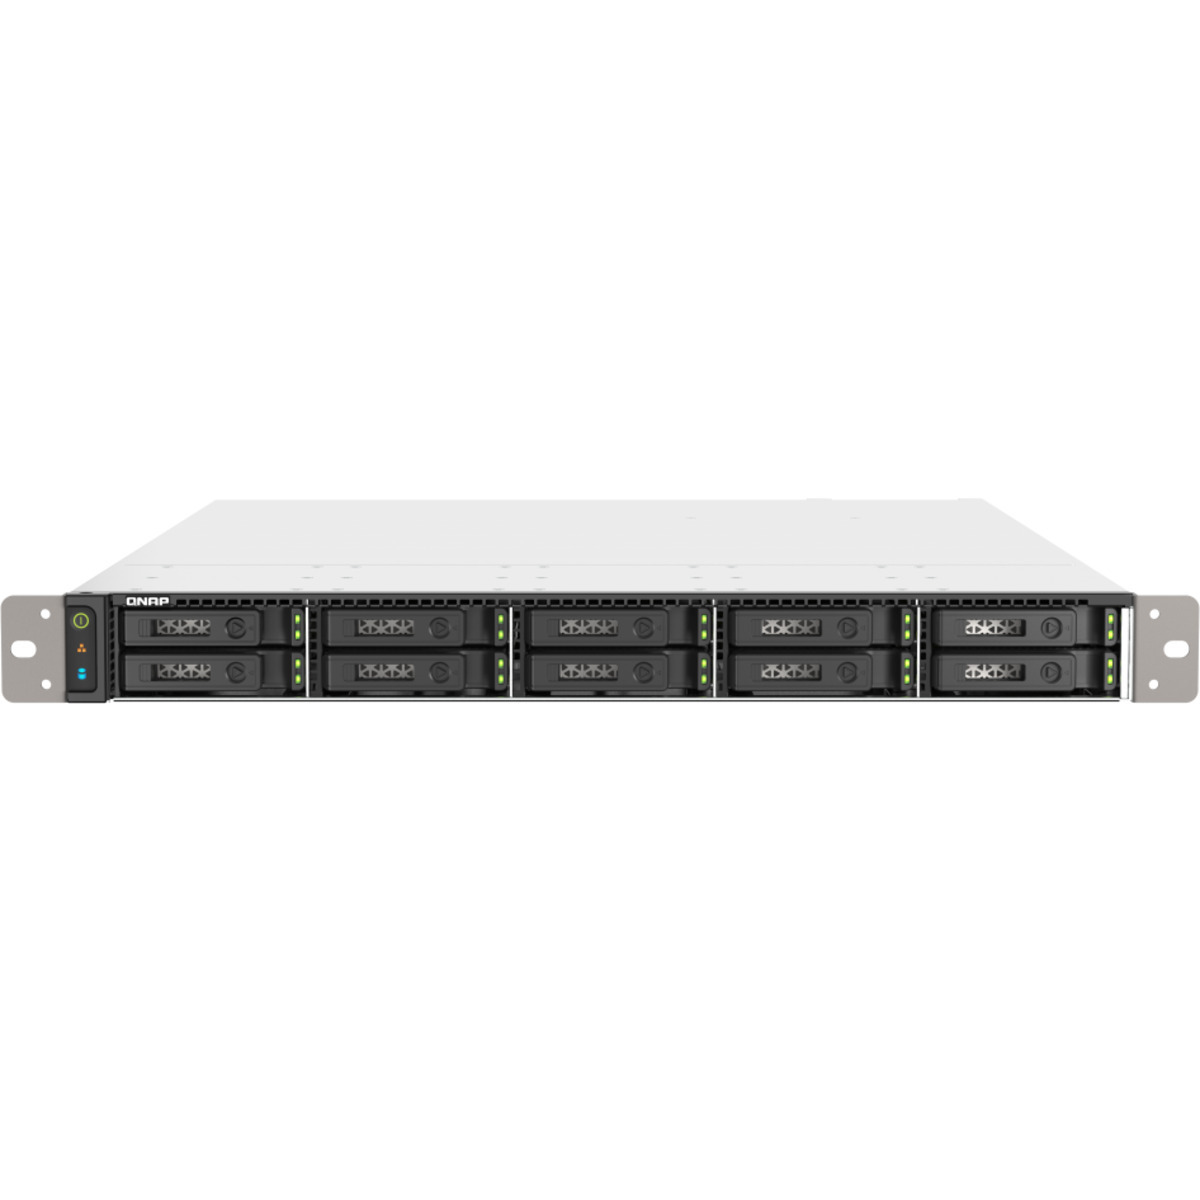 QNAP TS-h1090FU-7232P 4tb 10-Bay RackMount Large Business / Enterprise NAS - Network Attached Storage Device 8x500gb Crucial P3 Plus CT500P3PSSD8  4700/1900MB/s M.2 2280 NVMe SSD CONSUMER Class Drives Installed - Burn-In Tested TS-h1090FU-7232P